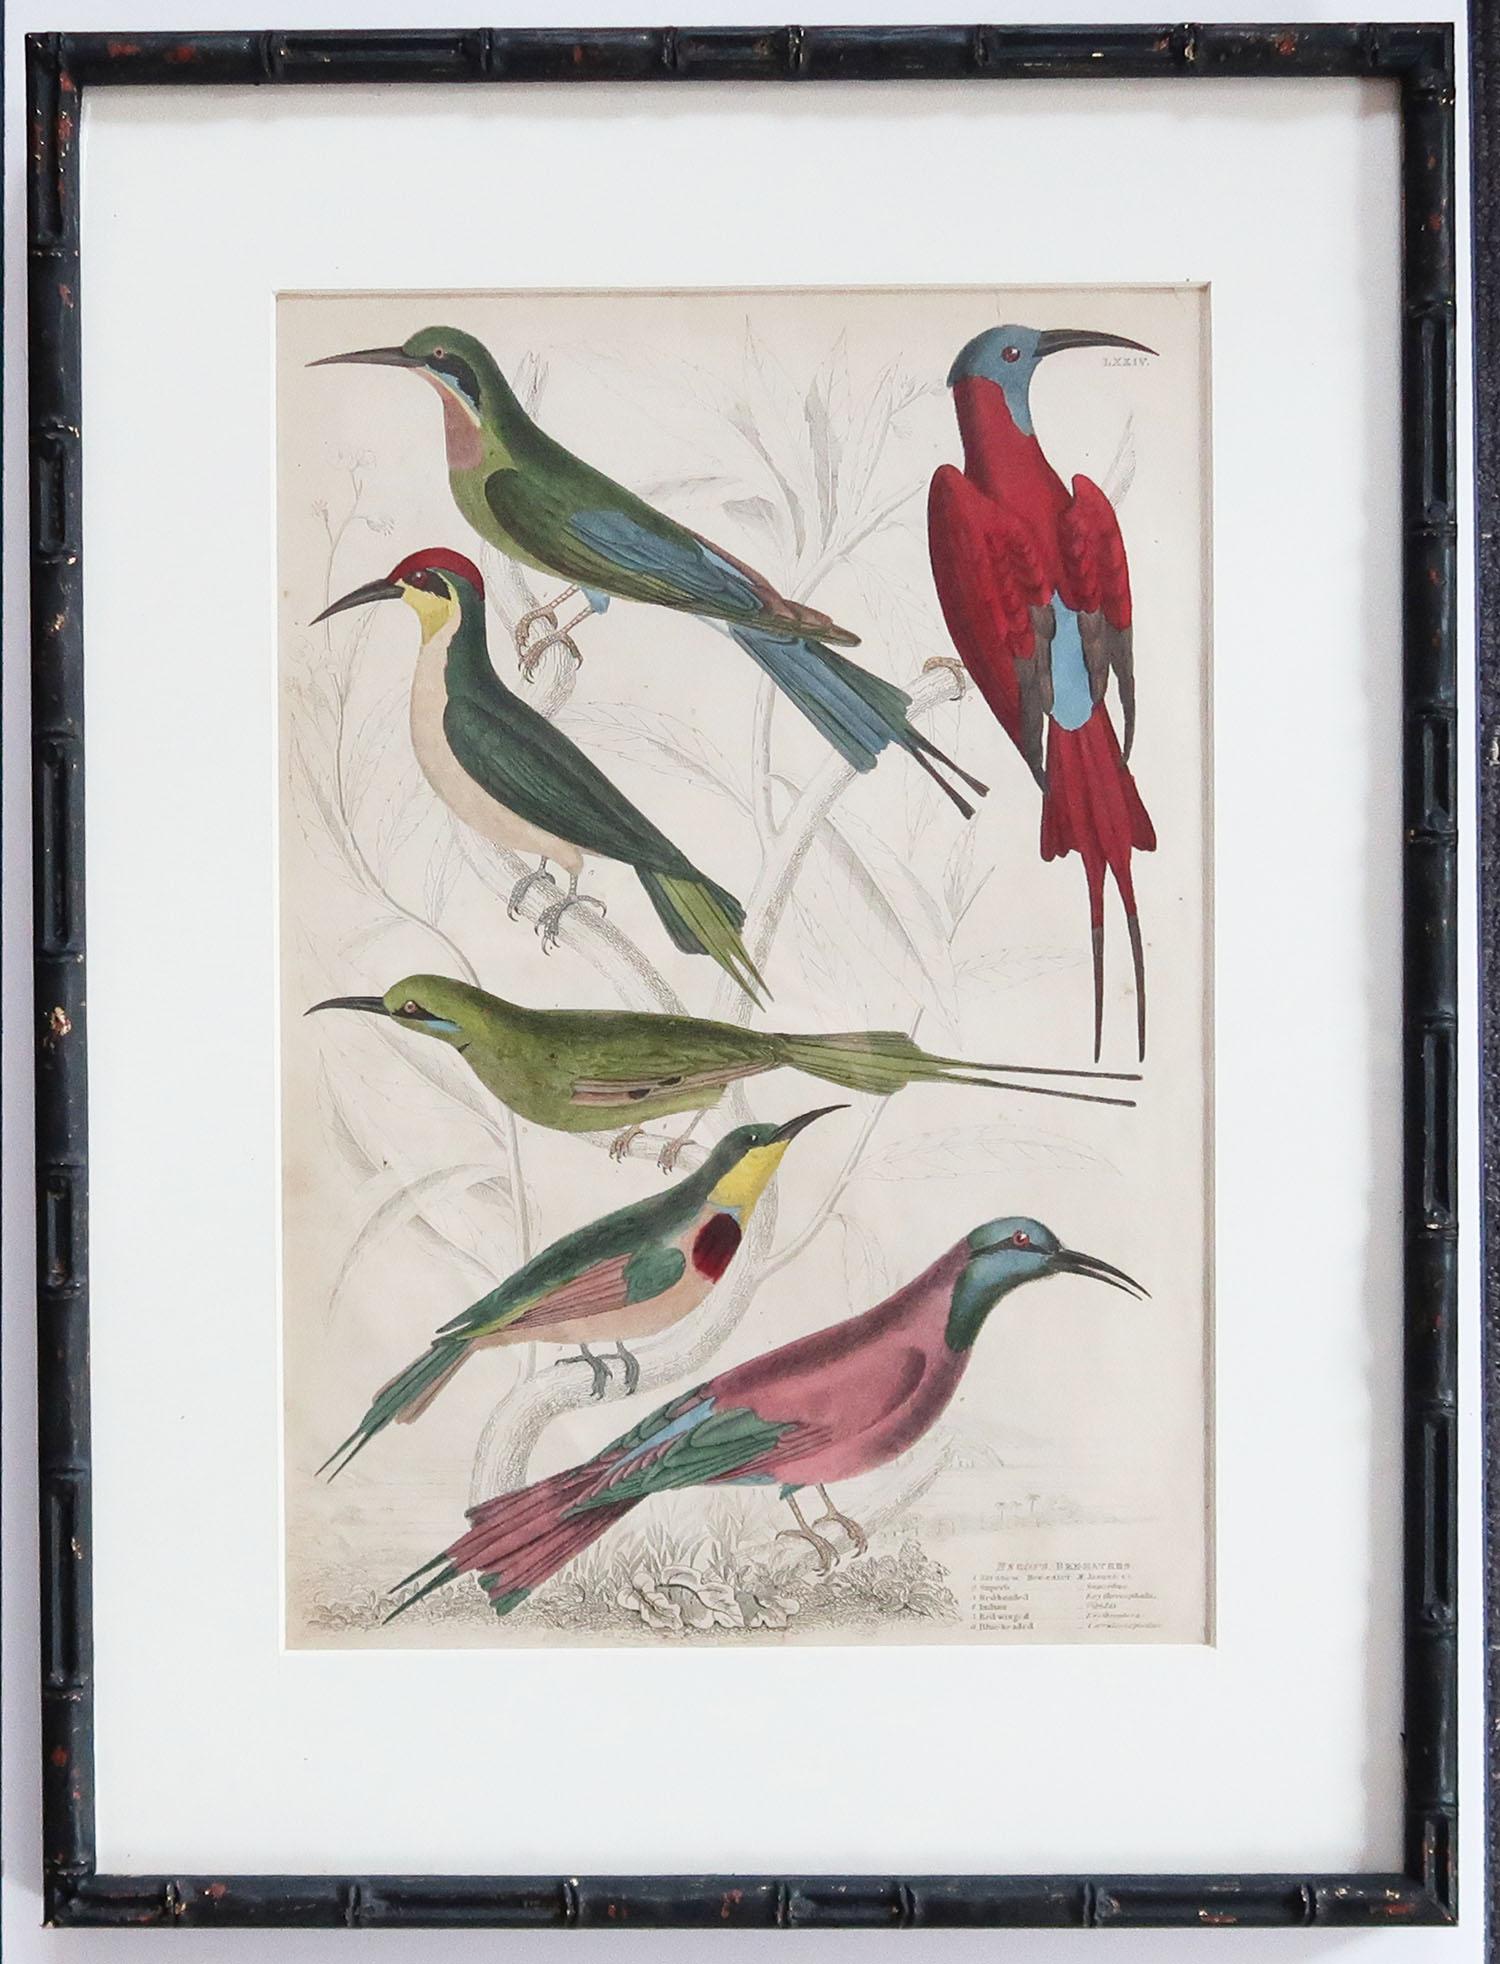 Chinoiserie Set of 10 Antique Bird Prints in Ebonized Faux Bamboo Frames, 1830s